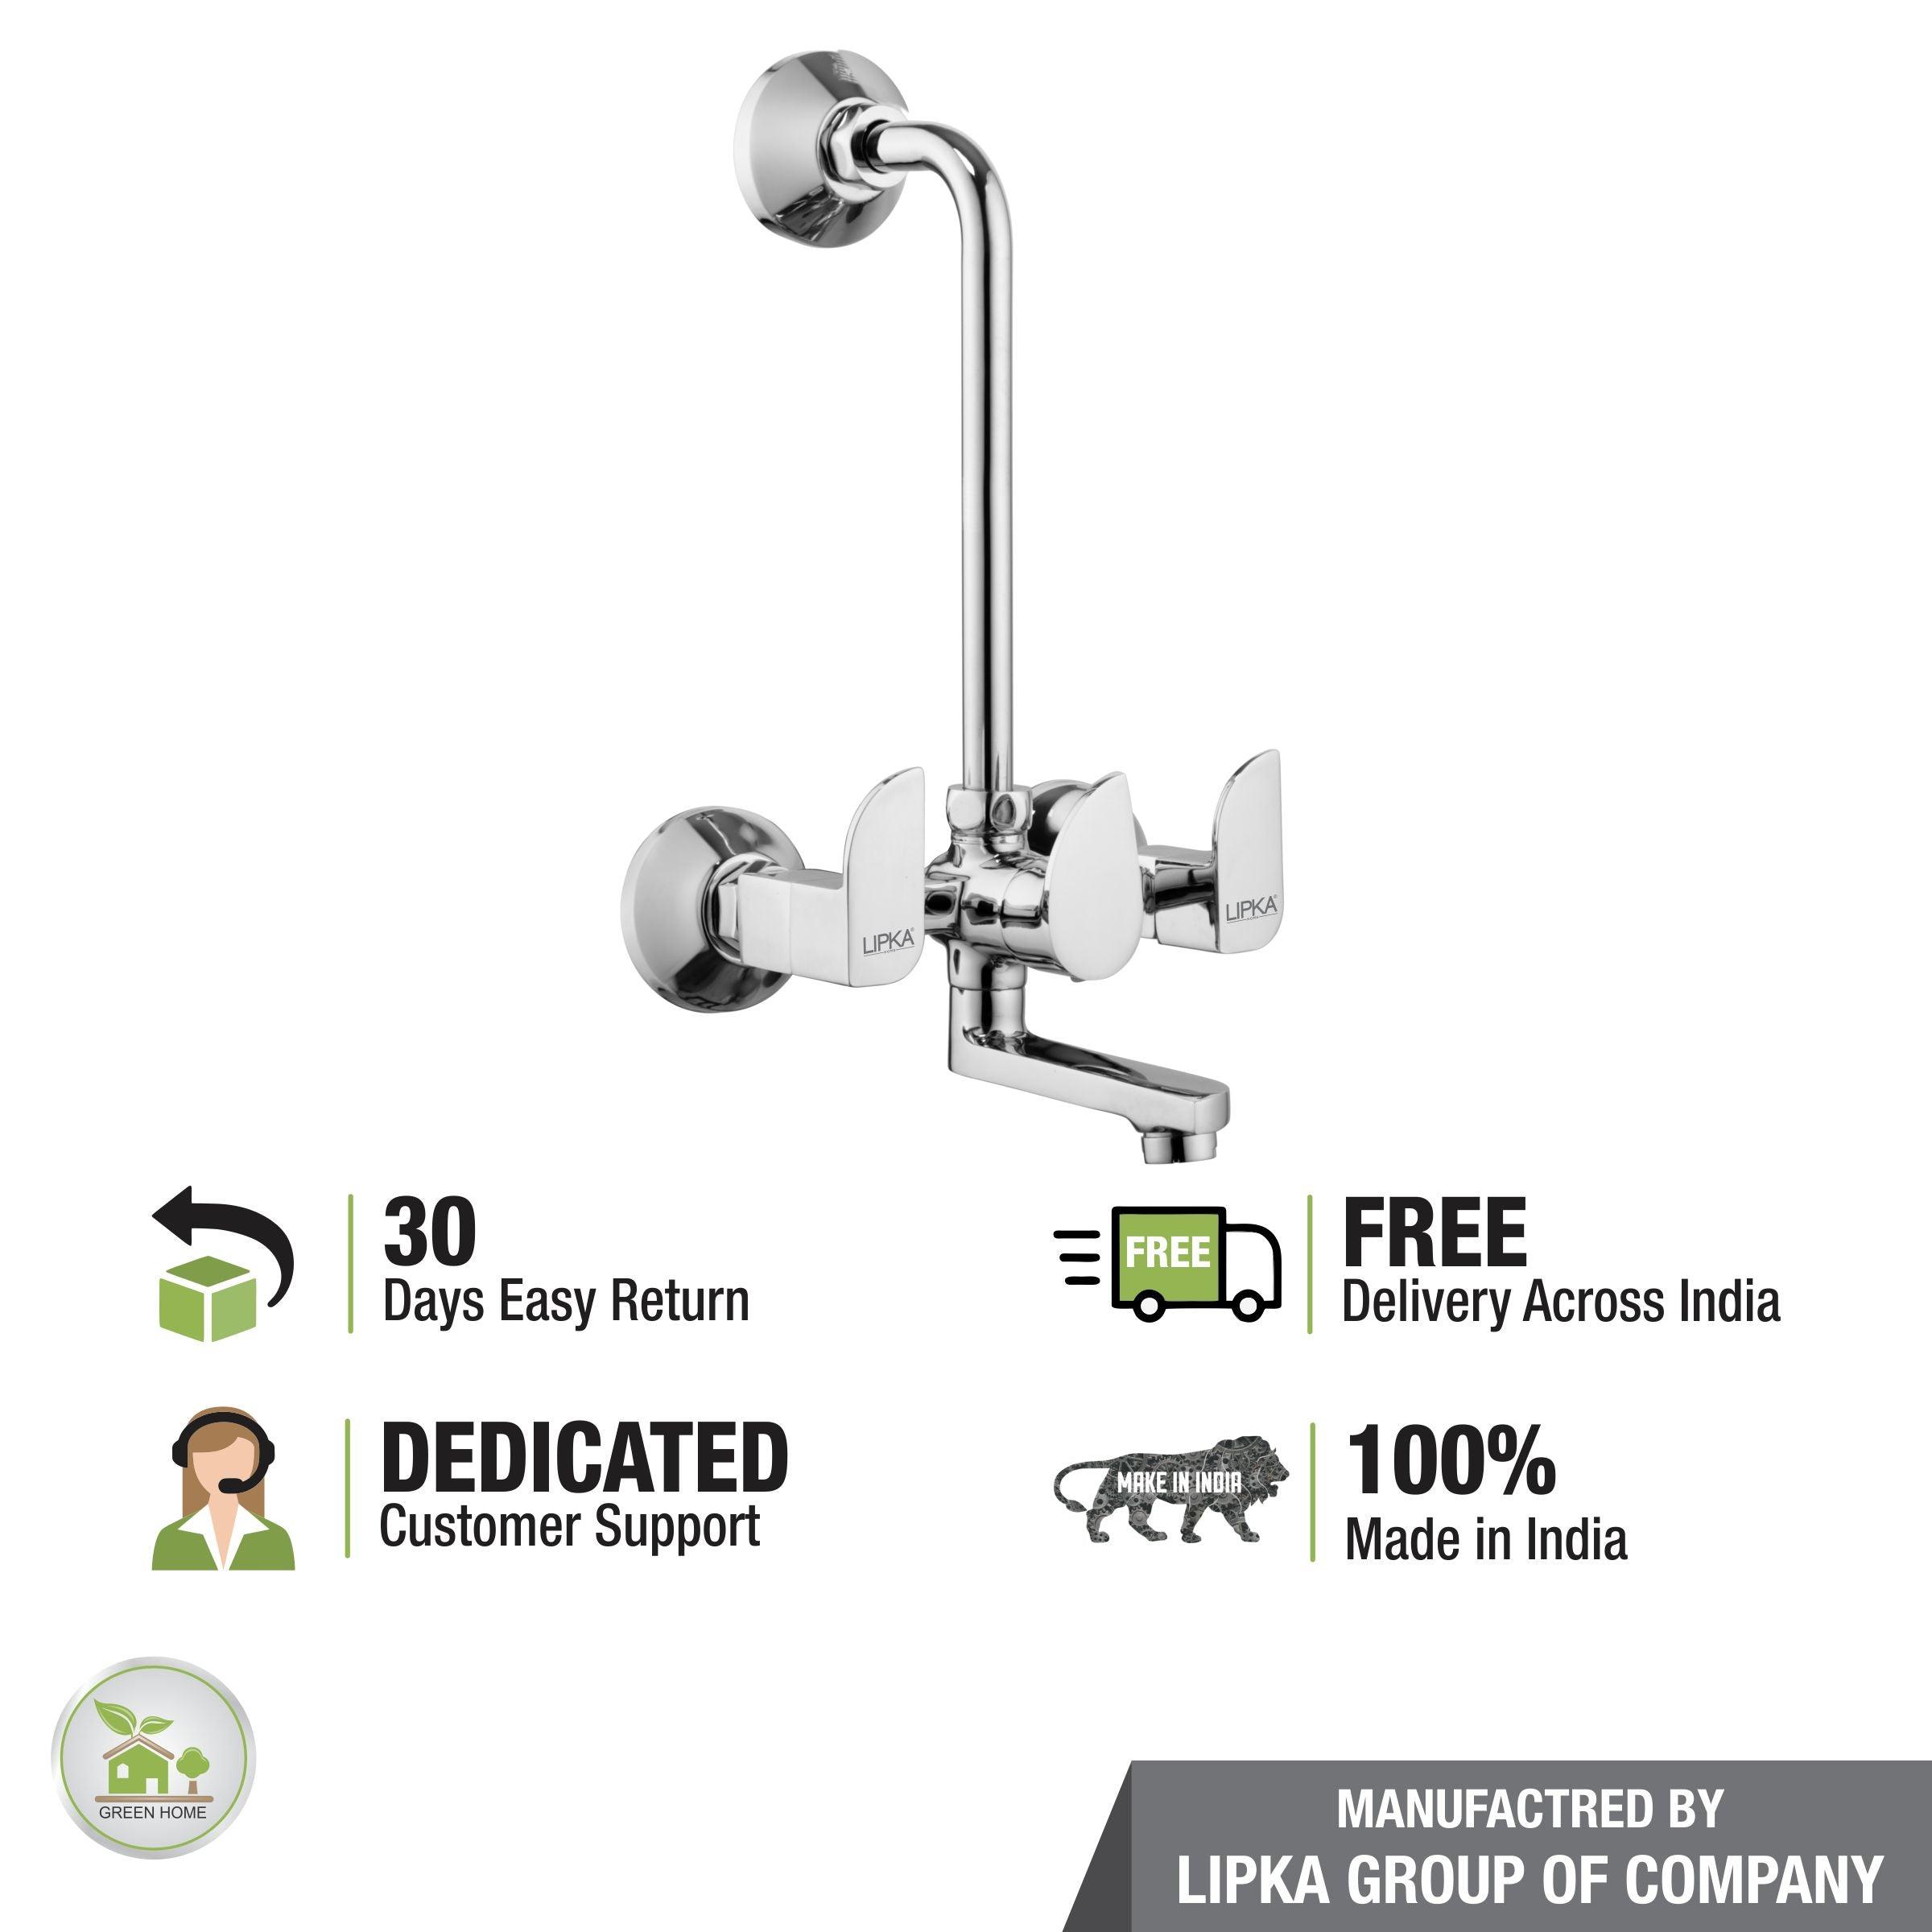 Arise Wall Mixer with L Bend Faucet free delivery